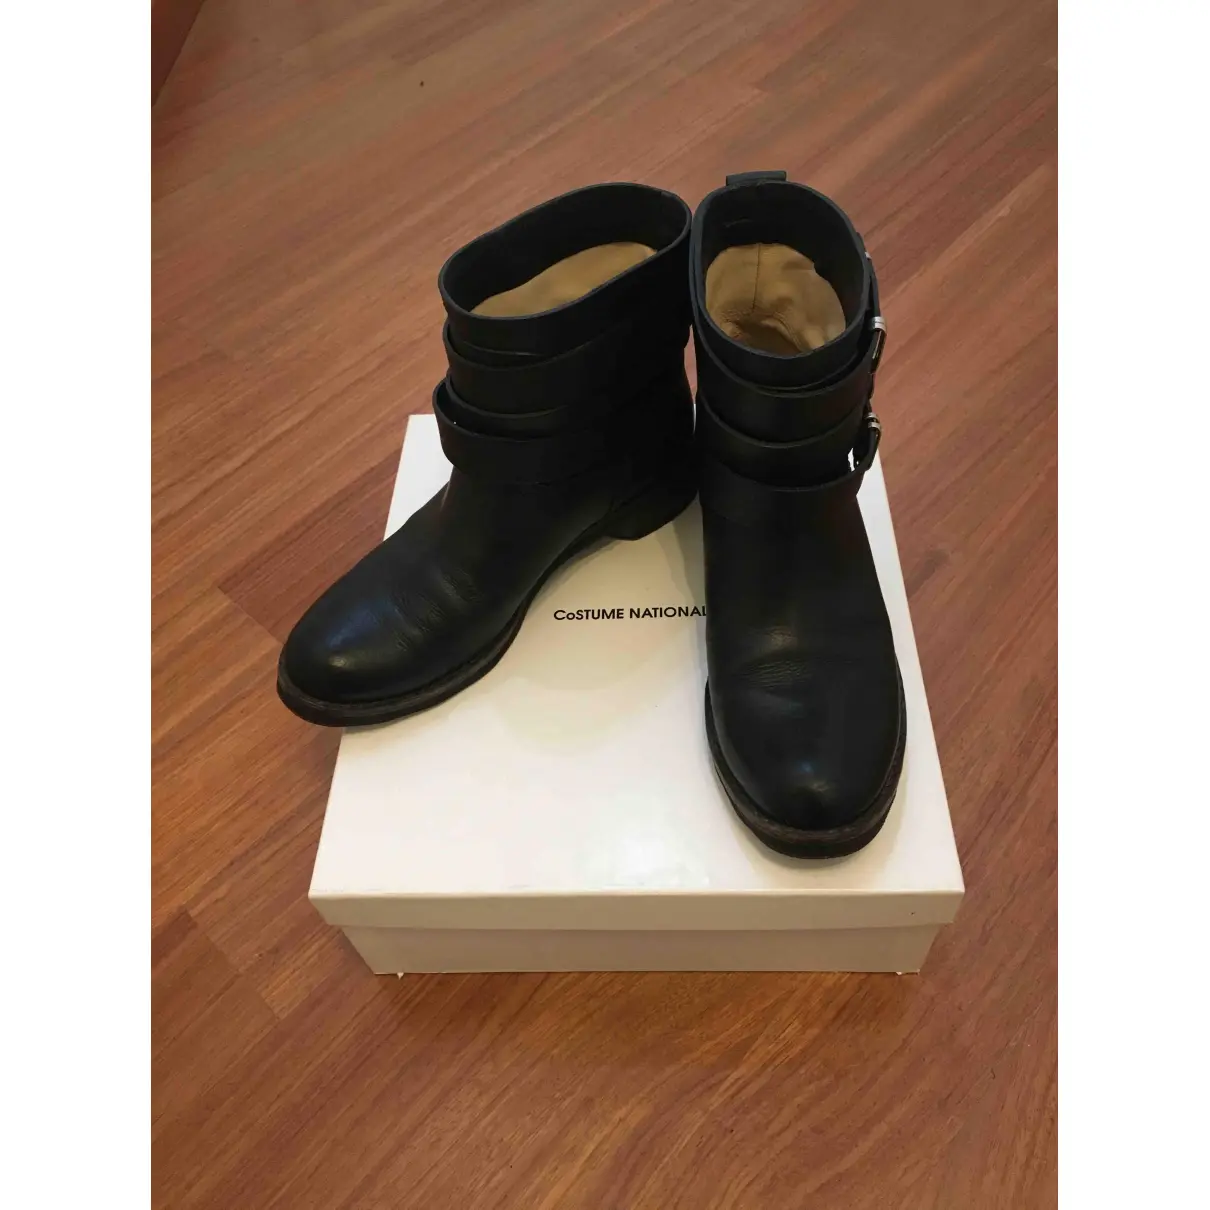 Buy Costume National Leather biker boots online